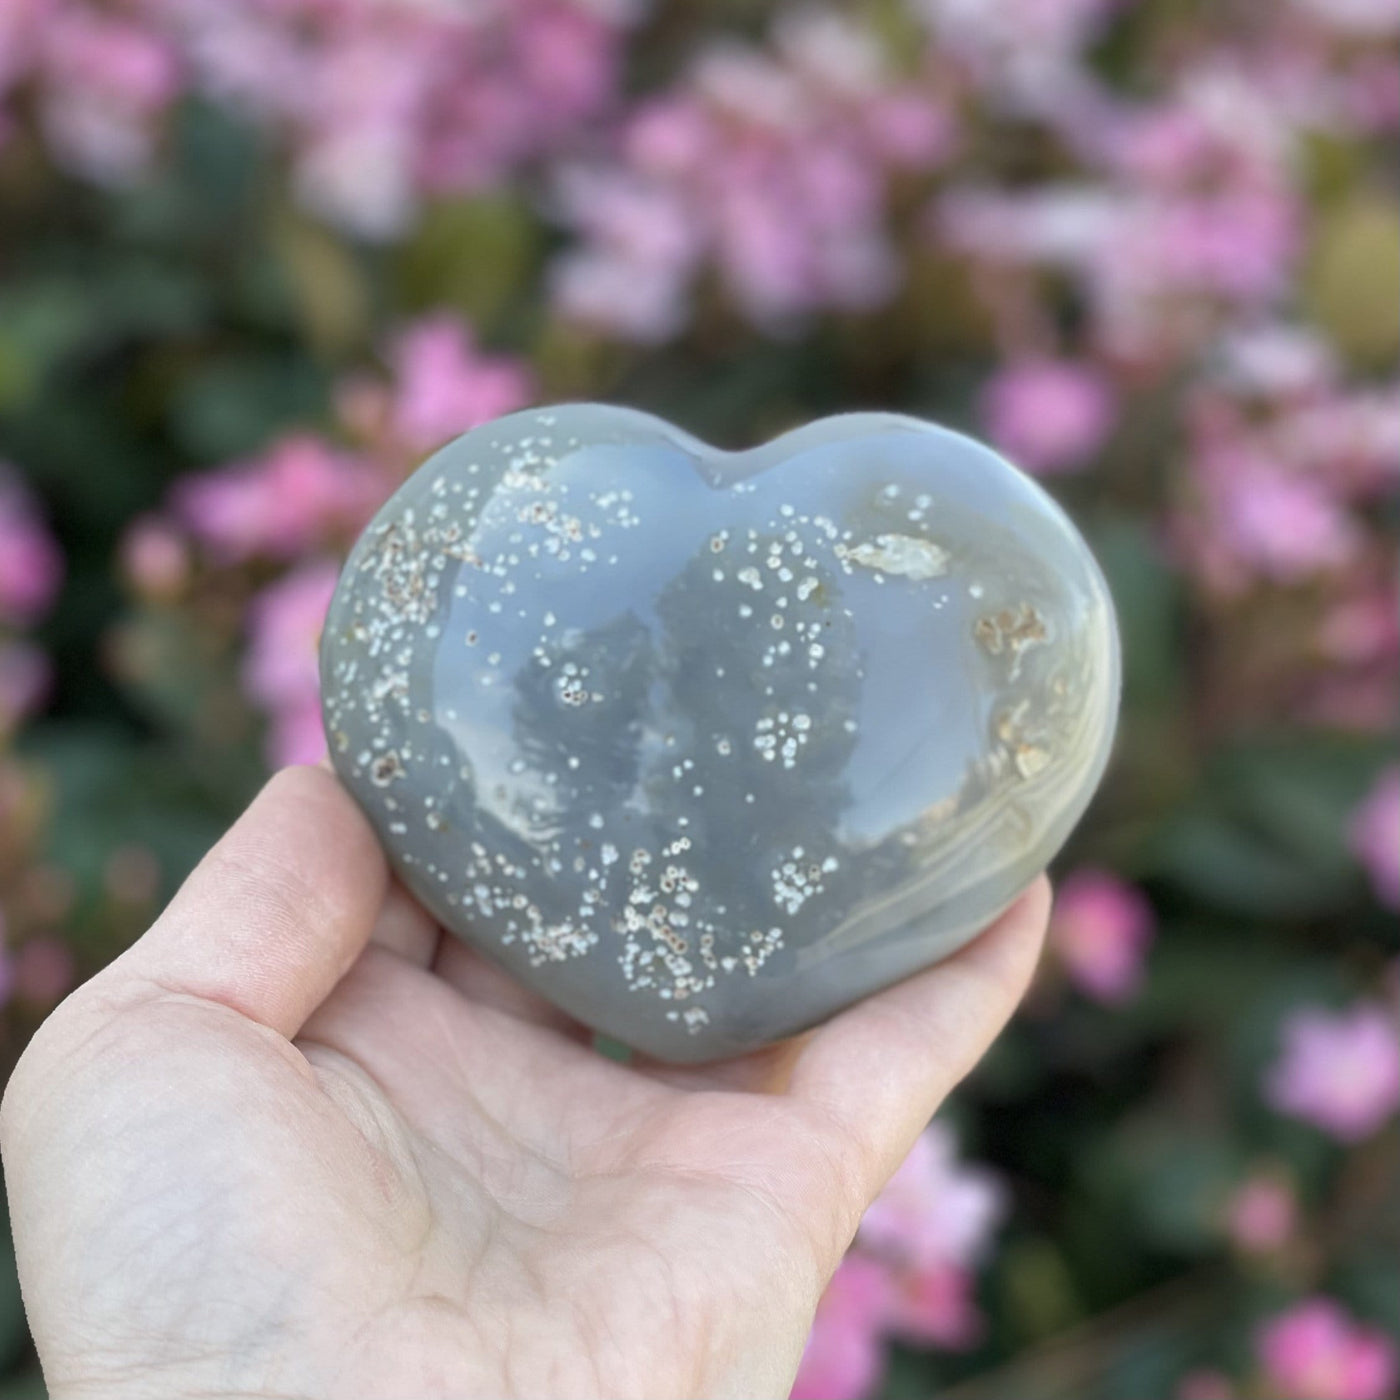 Back side of  Druzy Natural Agate Heart Shaped Stone in a hand with flowers in the background.